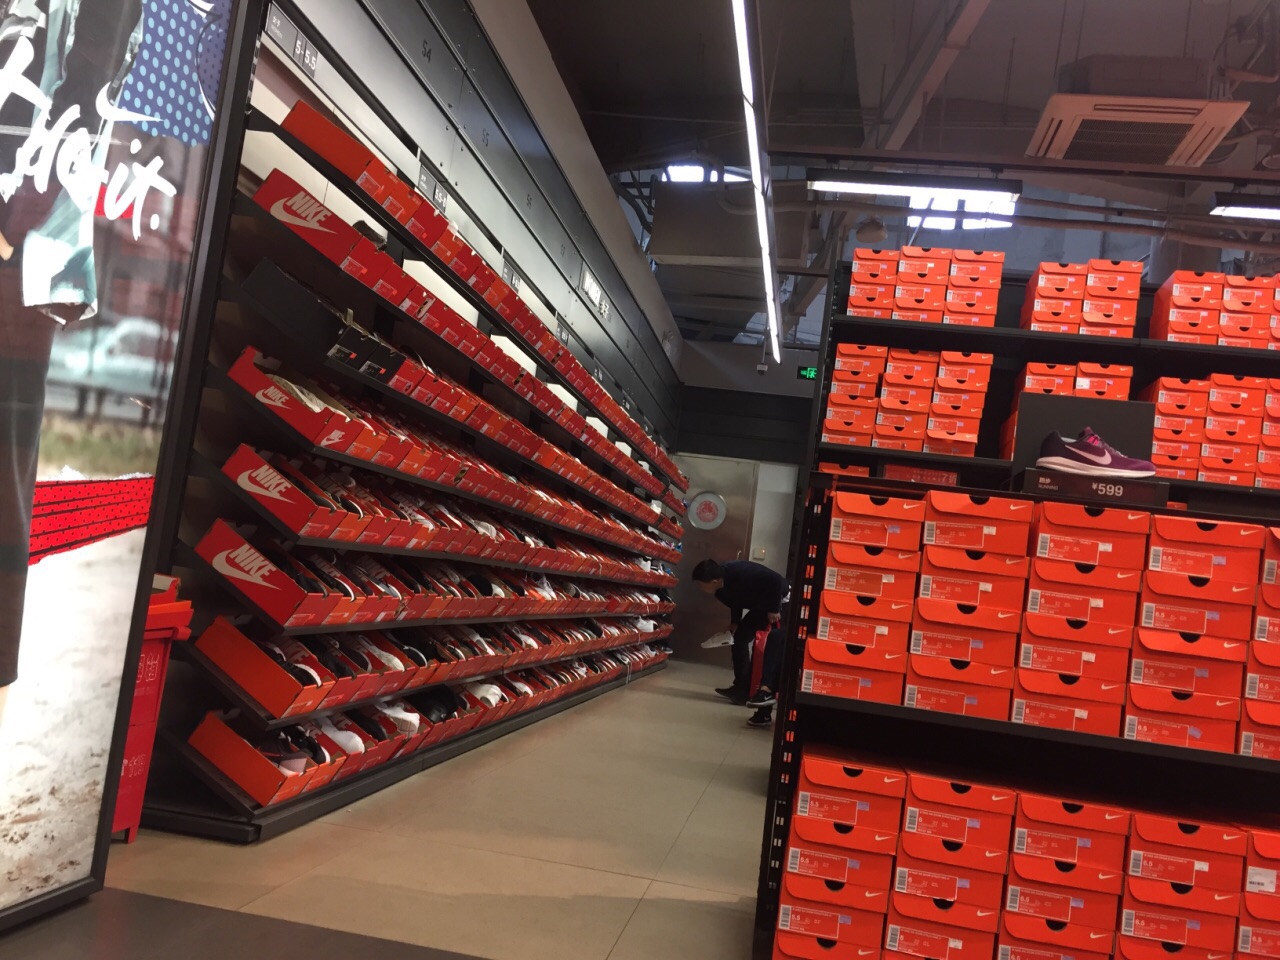 Shopping itineraries in NIKE in 2023-06-03T17:00:00-07:00 (updated in  2023-06-03T17:00:00-07:00) - Trip.com